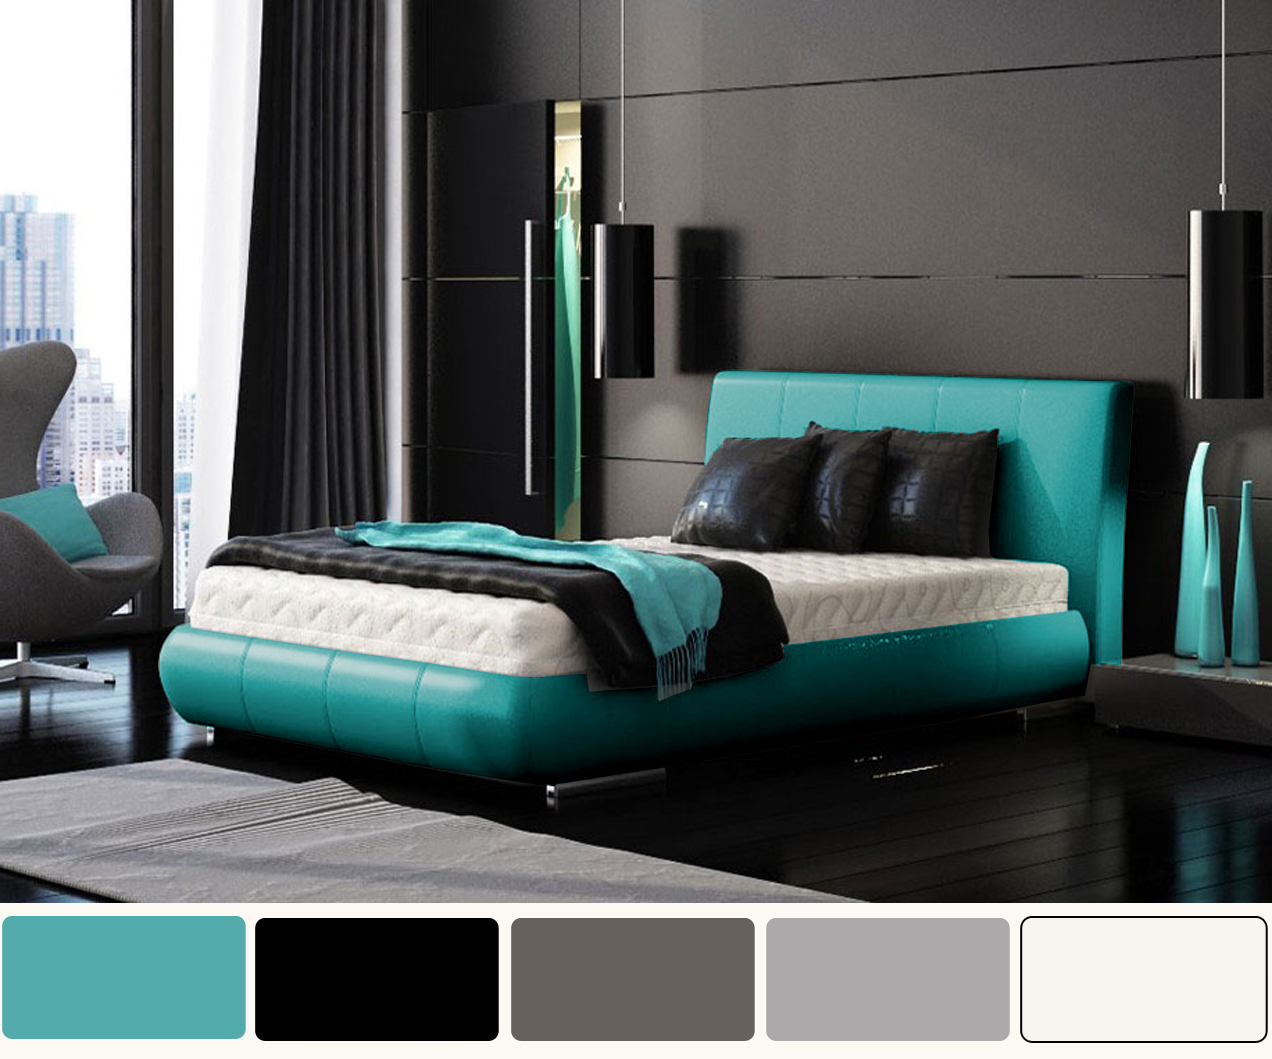 Black and Turquoise Bedroom ideas | Turquoise bedroom, Color ...